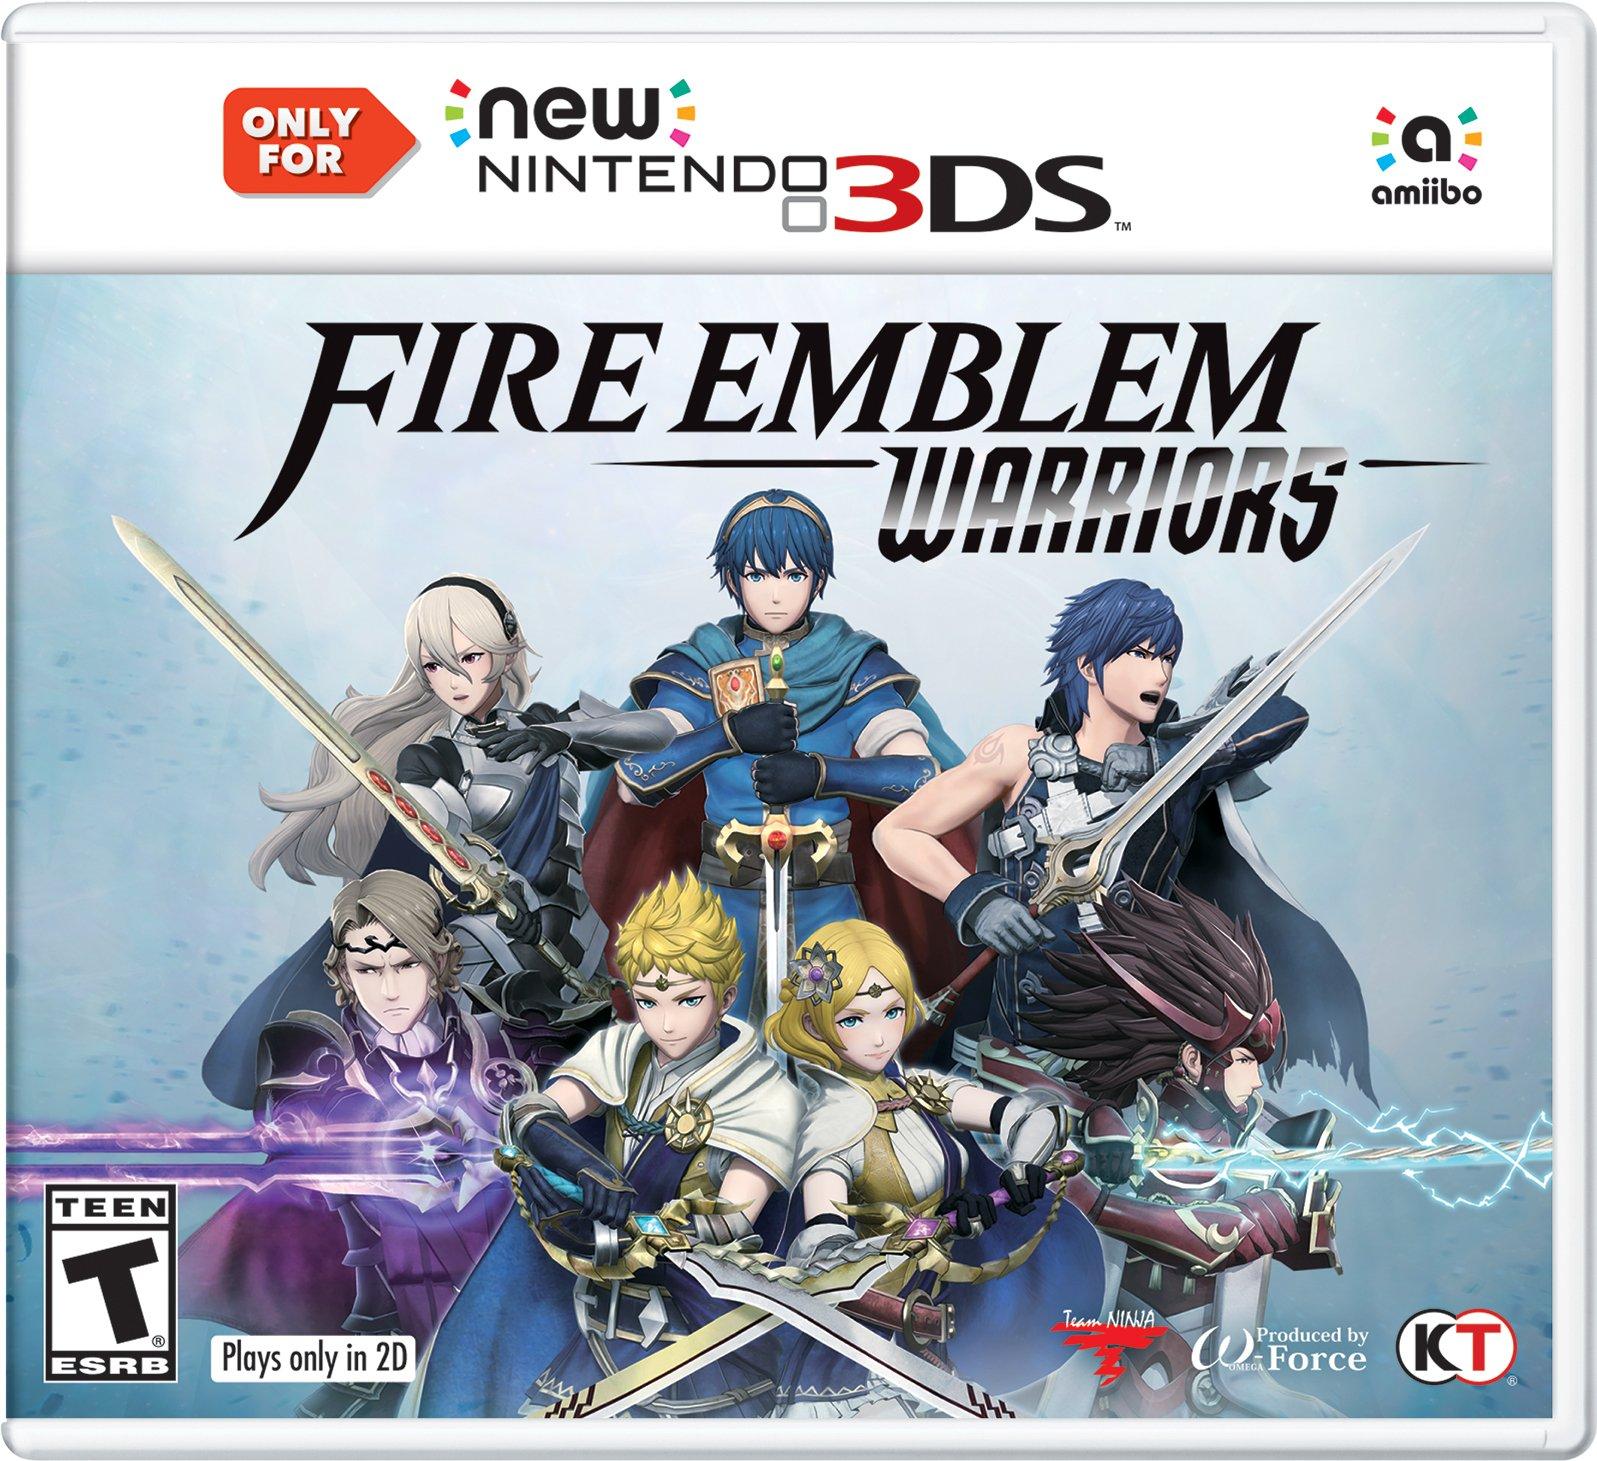 all fire emblem games on 3ds